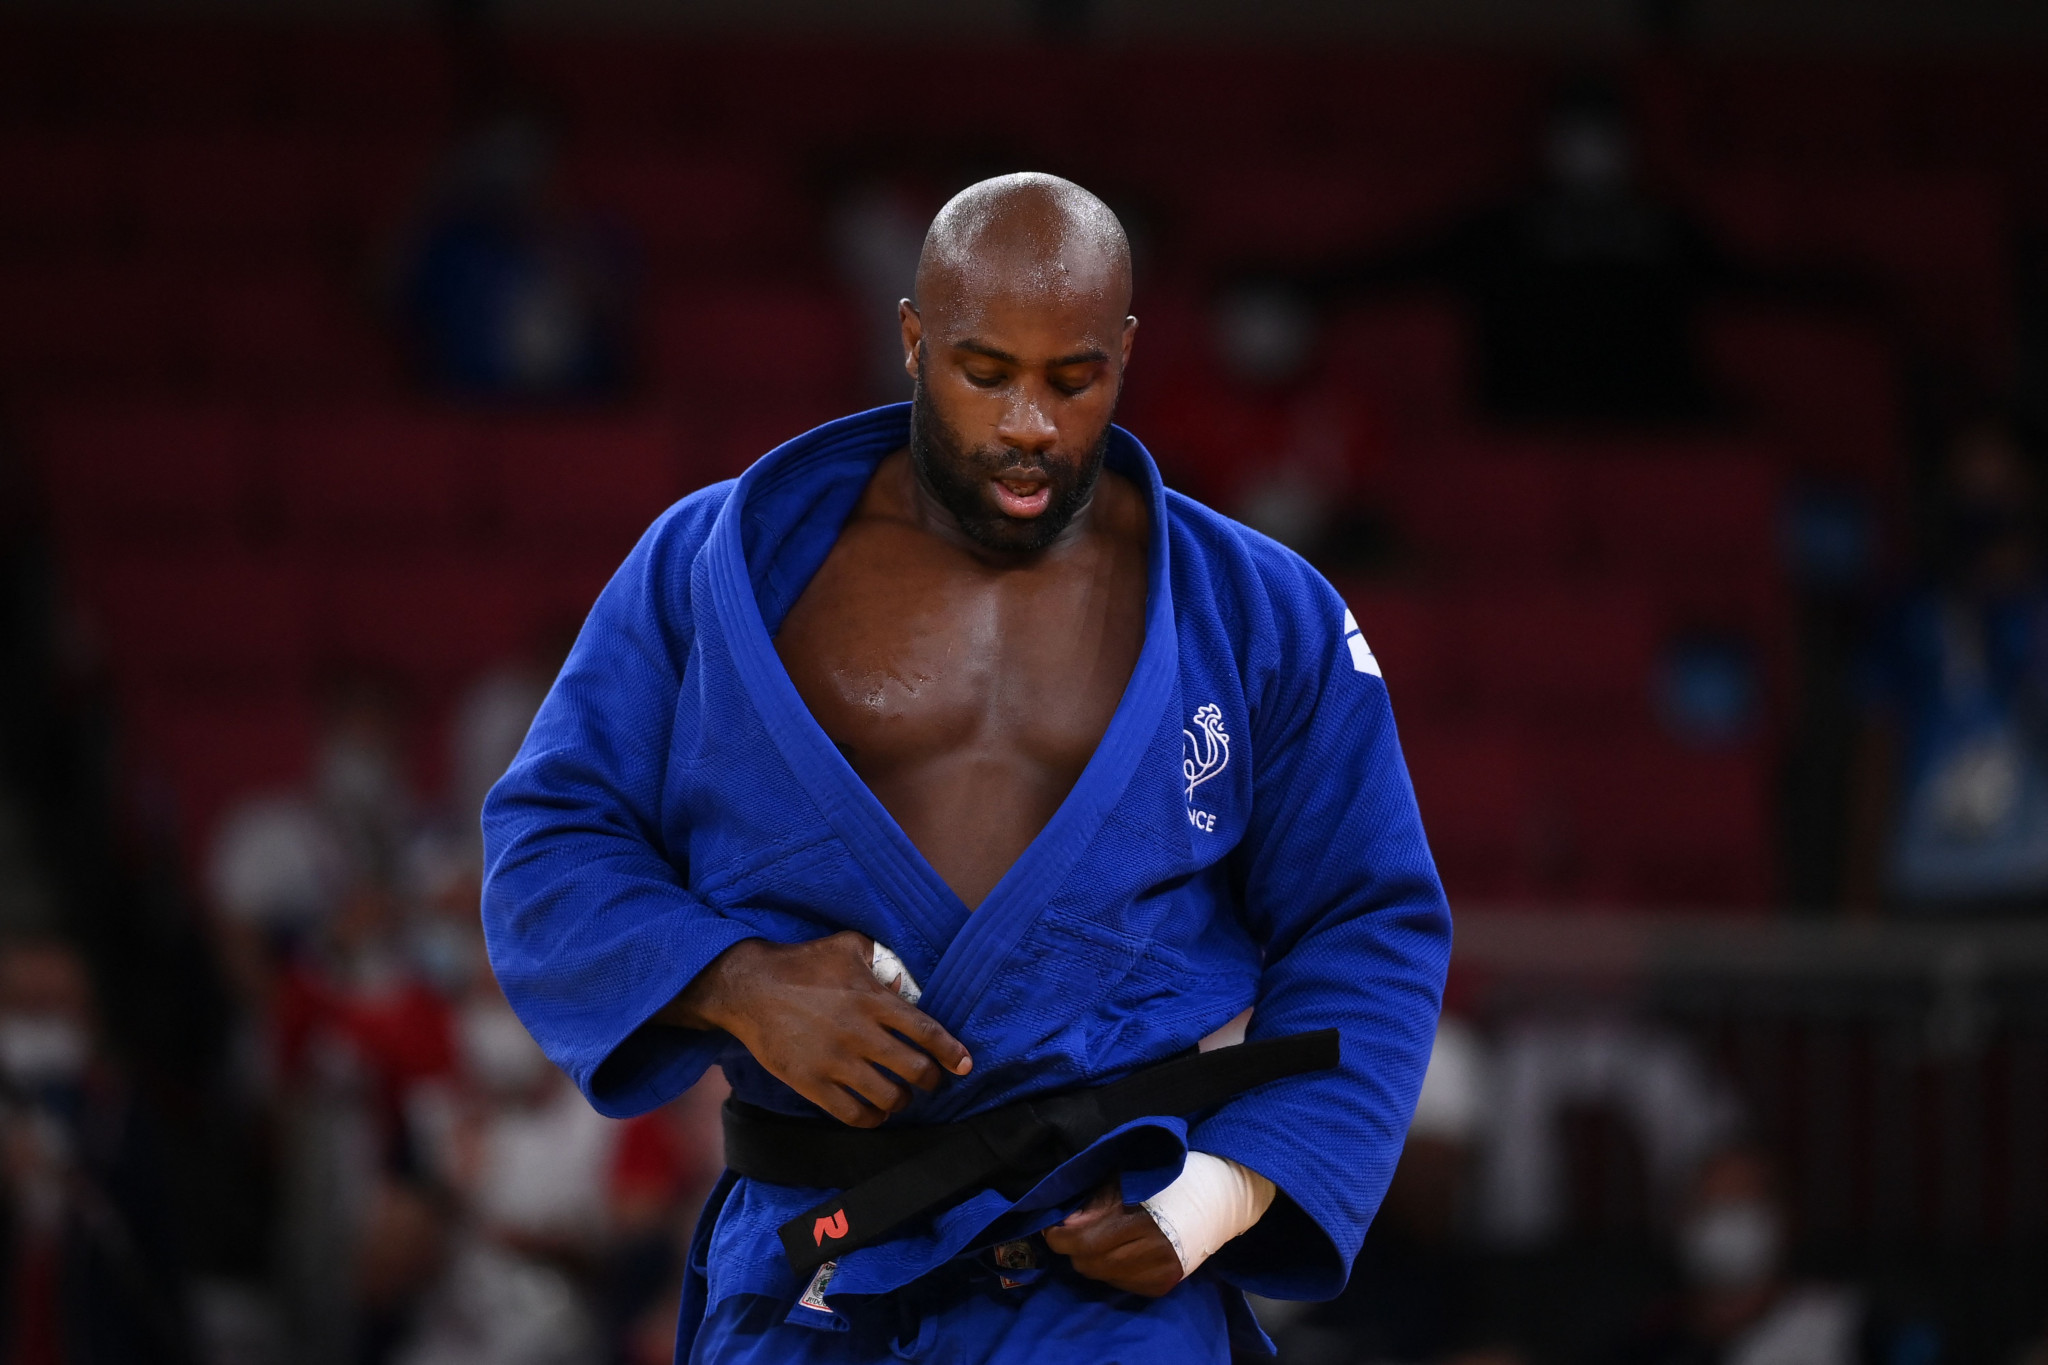 France's three-time Olympic judo gold medallist Teddy Riner is worried about getting injured before Paris 2024, he has admitted ©Getty Images